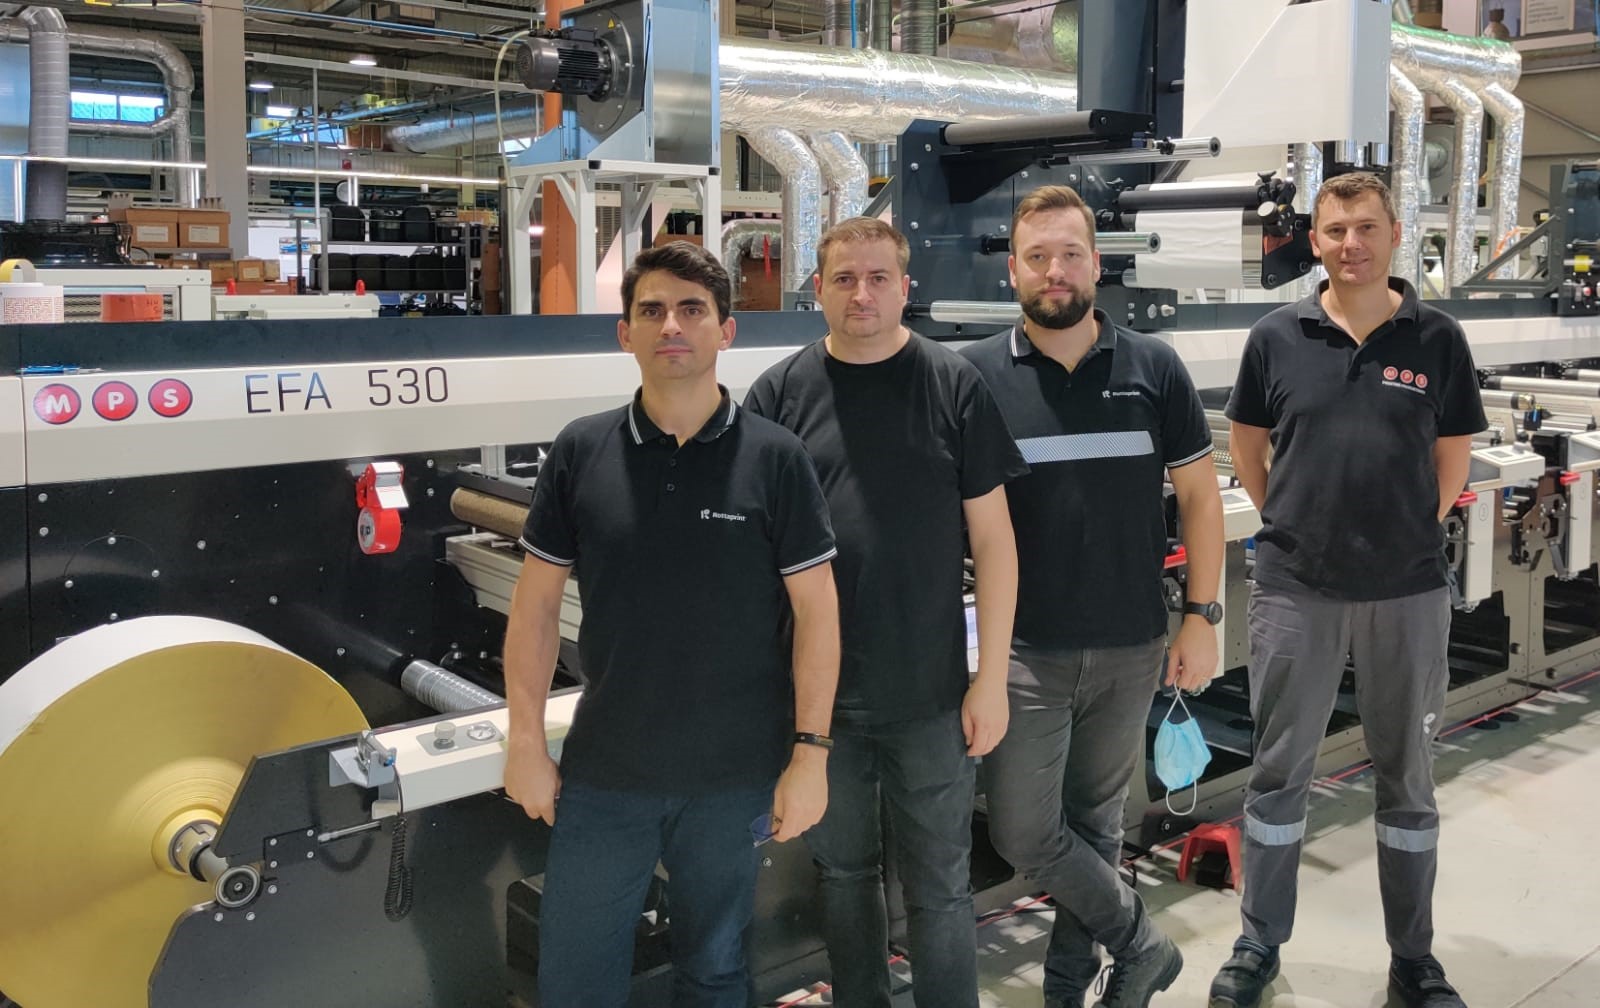 mps Rottaprint team with EFA530